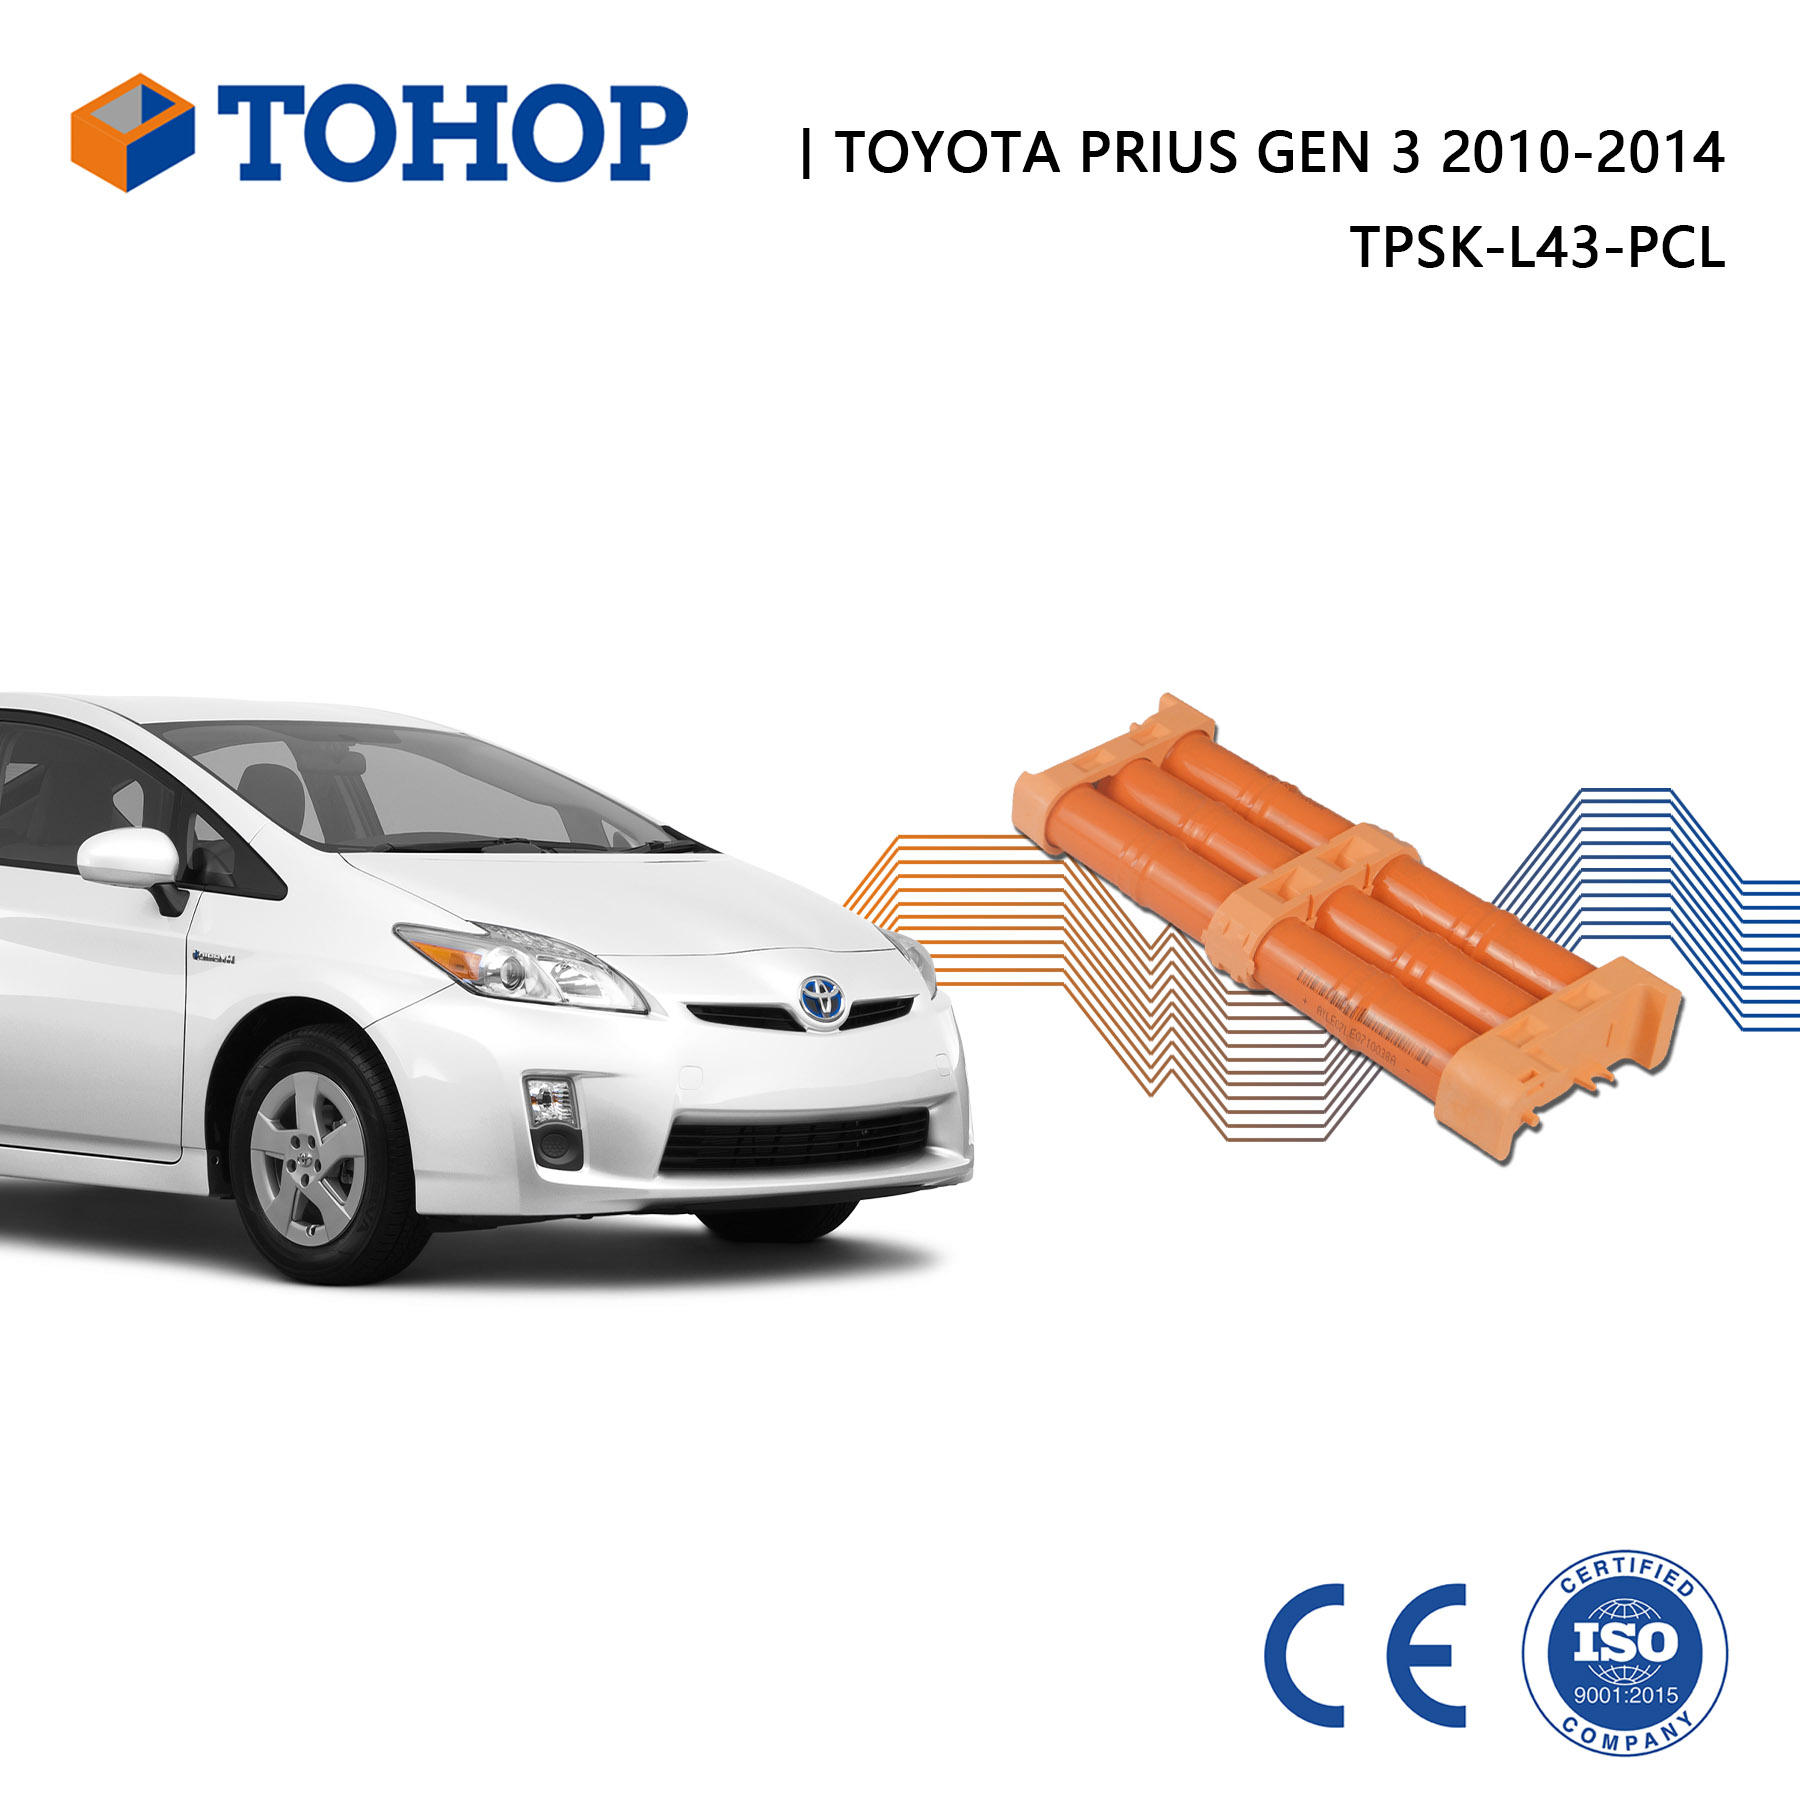 Cost Effective Replacement 14.4V Ni-Mh Hybrid Battery Pack For Toyota Prius Camry Hybrid Car